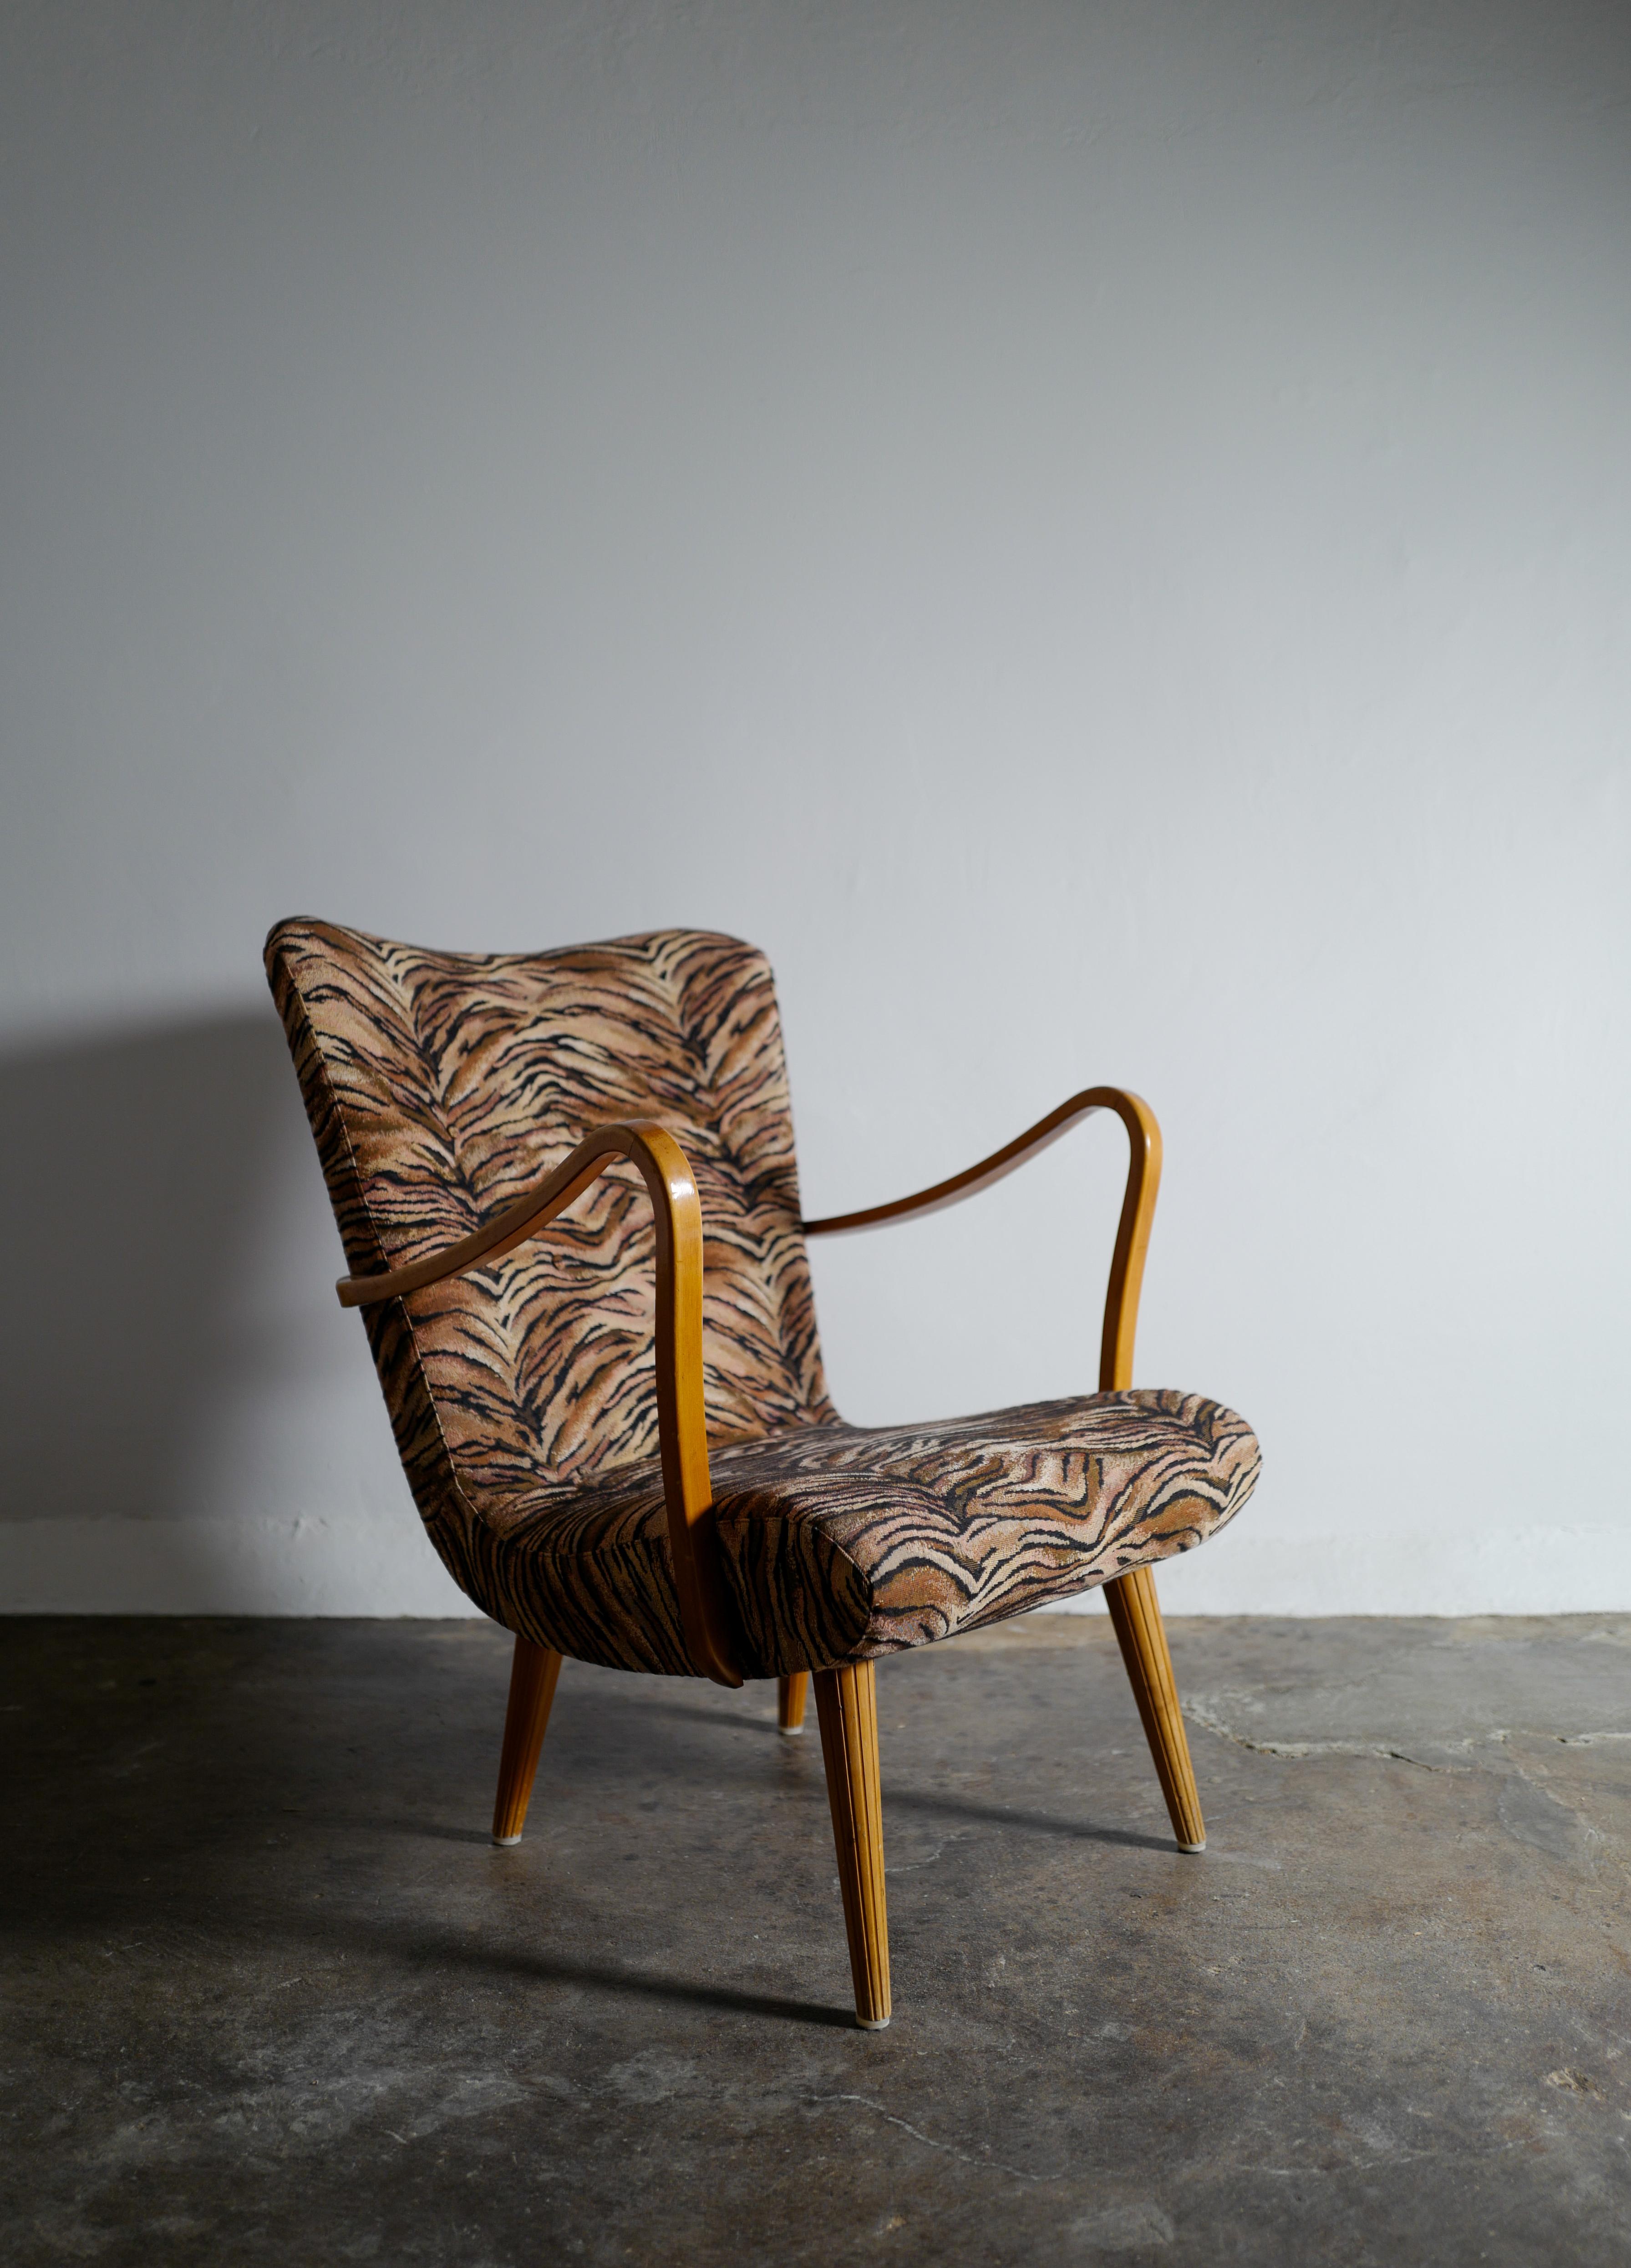 Rare armchair by unknown designer but made and produced in Sweden in good vintage condition with signs from use. The original funky zebra fabric upholstery adding some character.